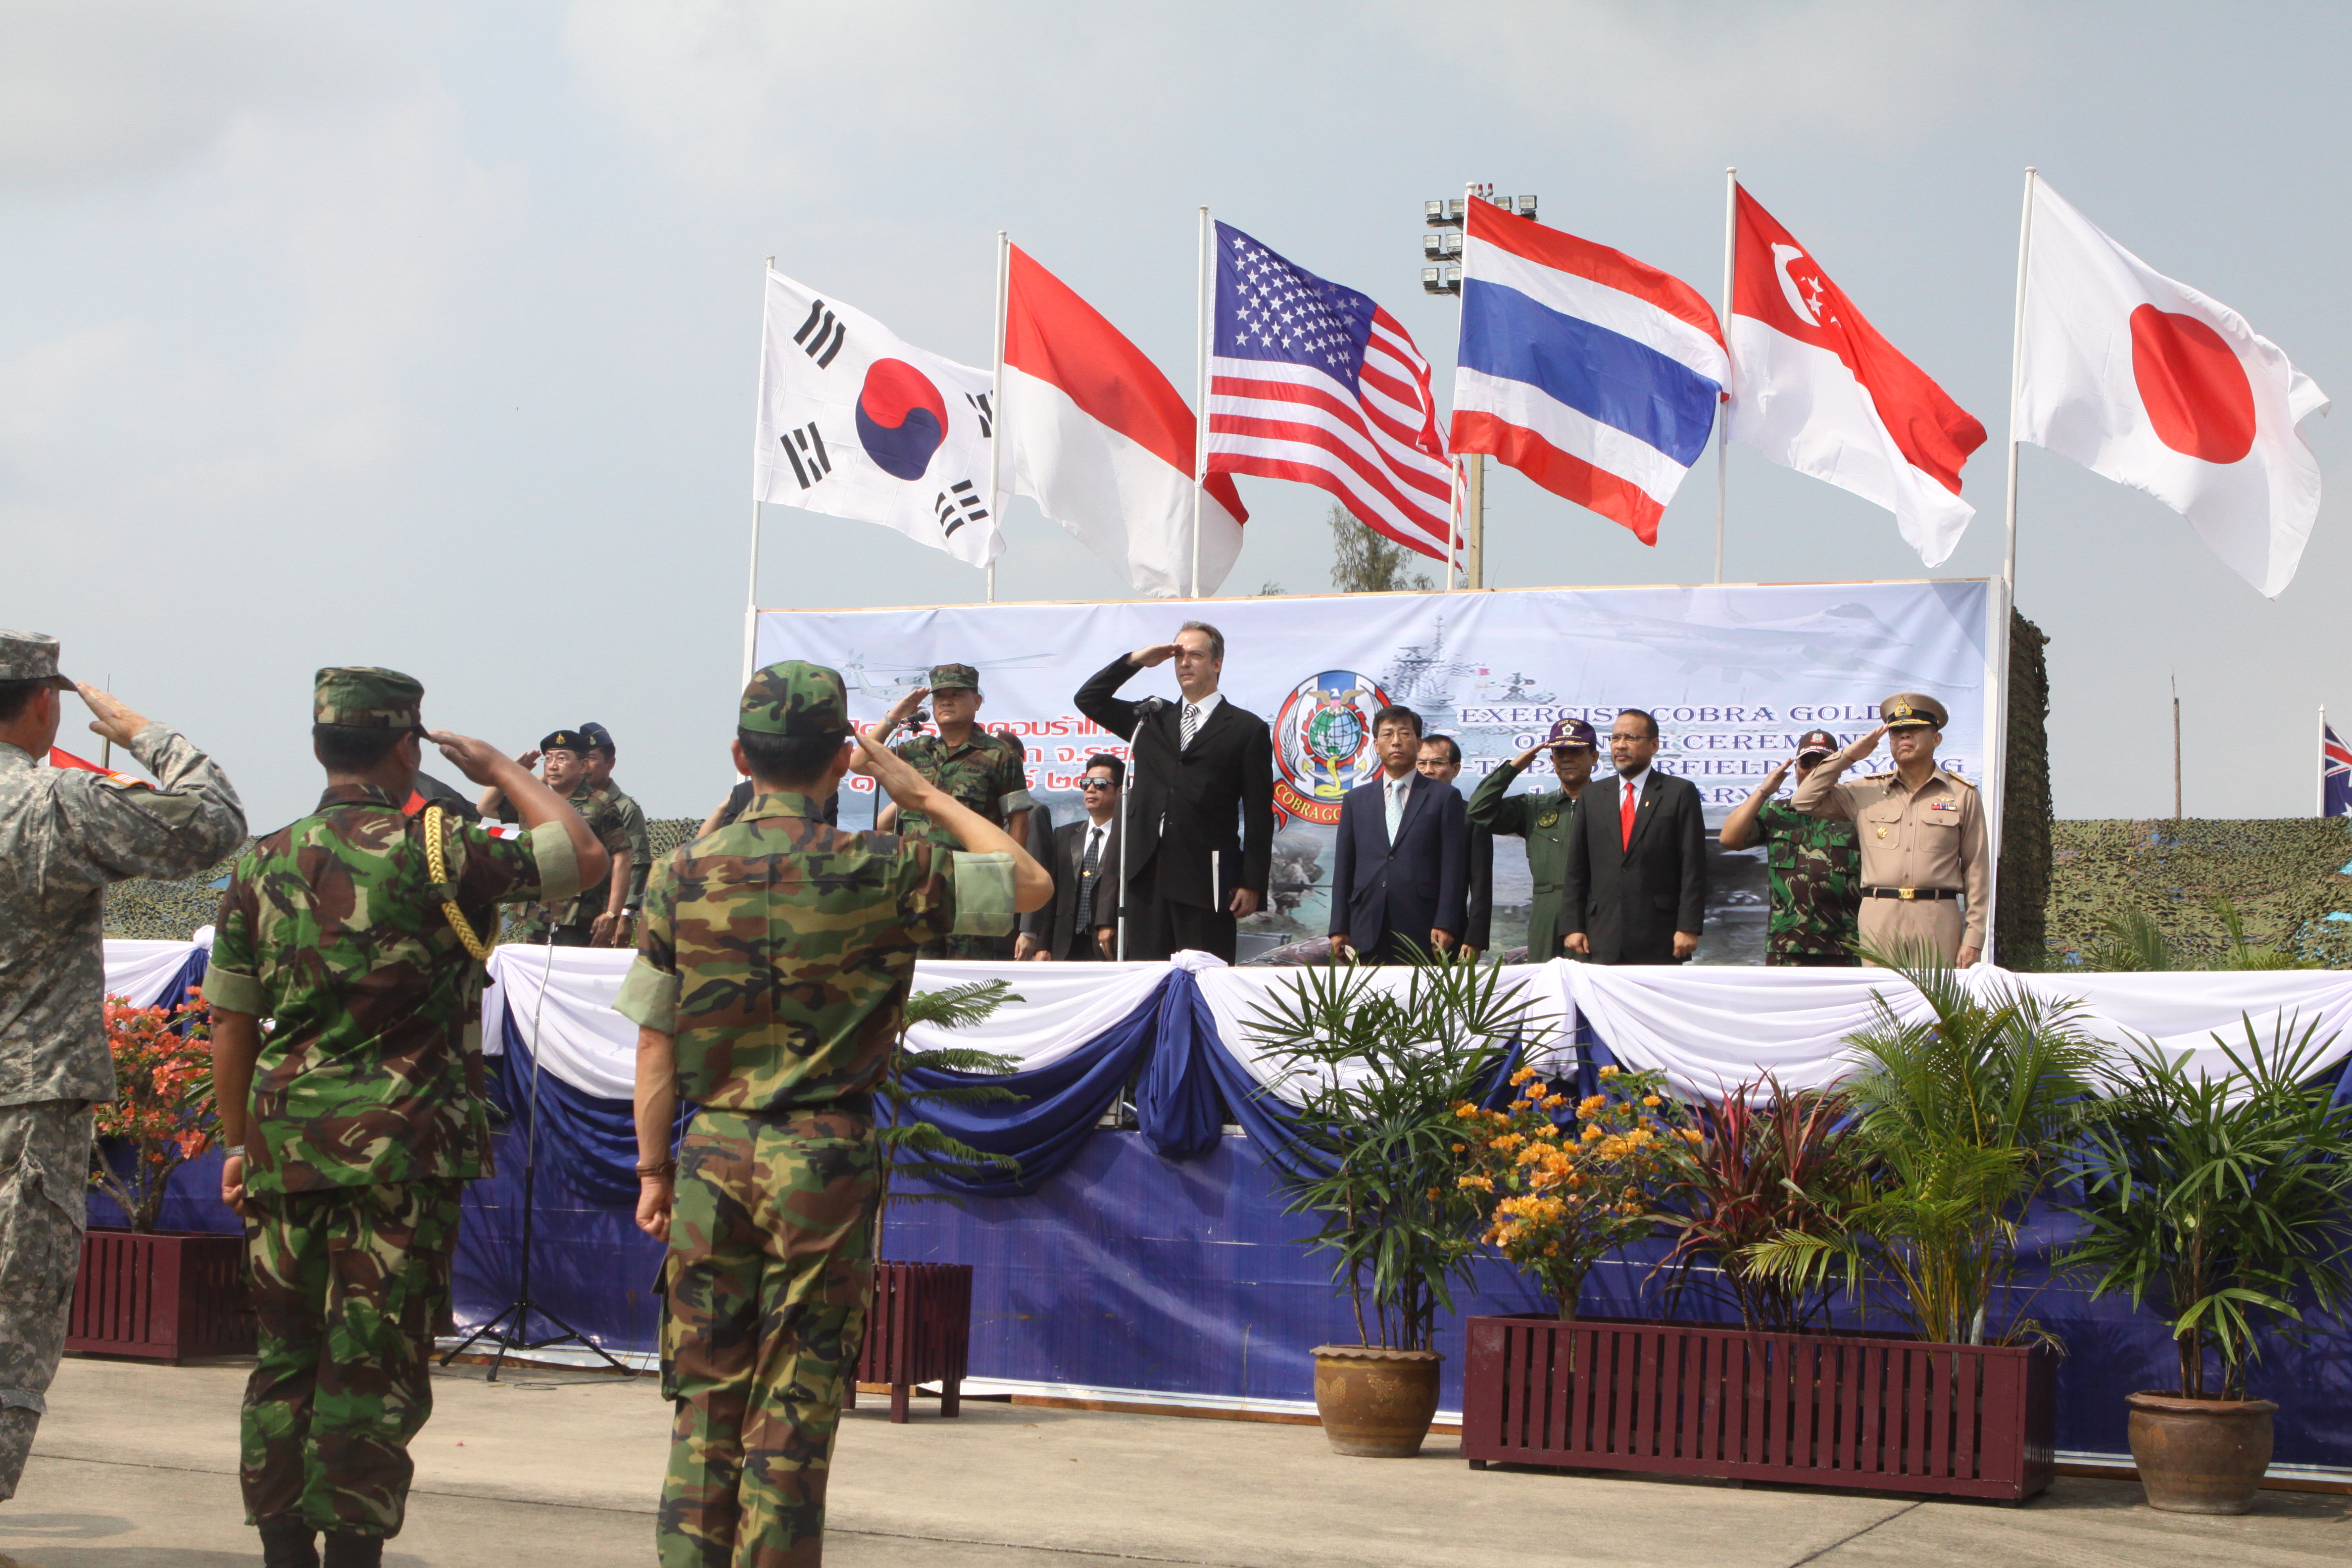 http://upload.wikimedia.org/wikipedia/commons/2/2d/US_Navy_100201-M-4593D-100_Military_members_stand_at_attention_during_the_Cobra_Gold_2010_opening_ceremony.jpg